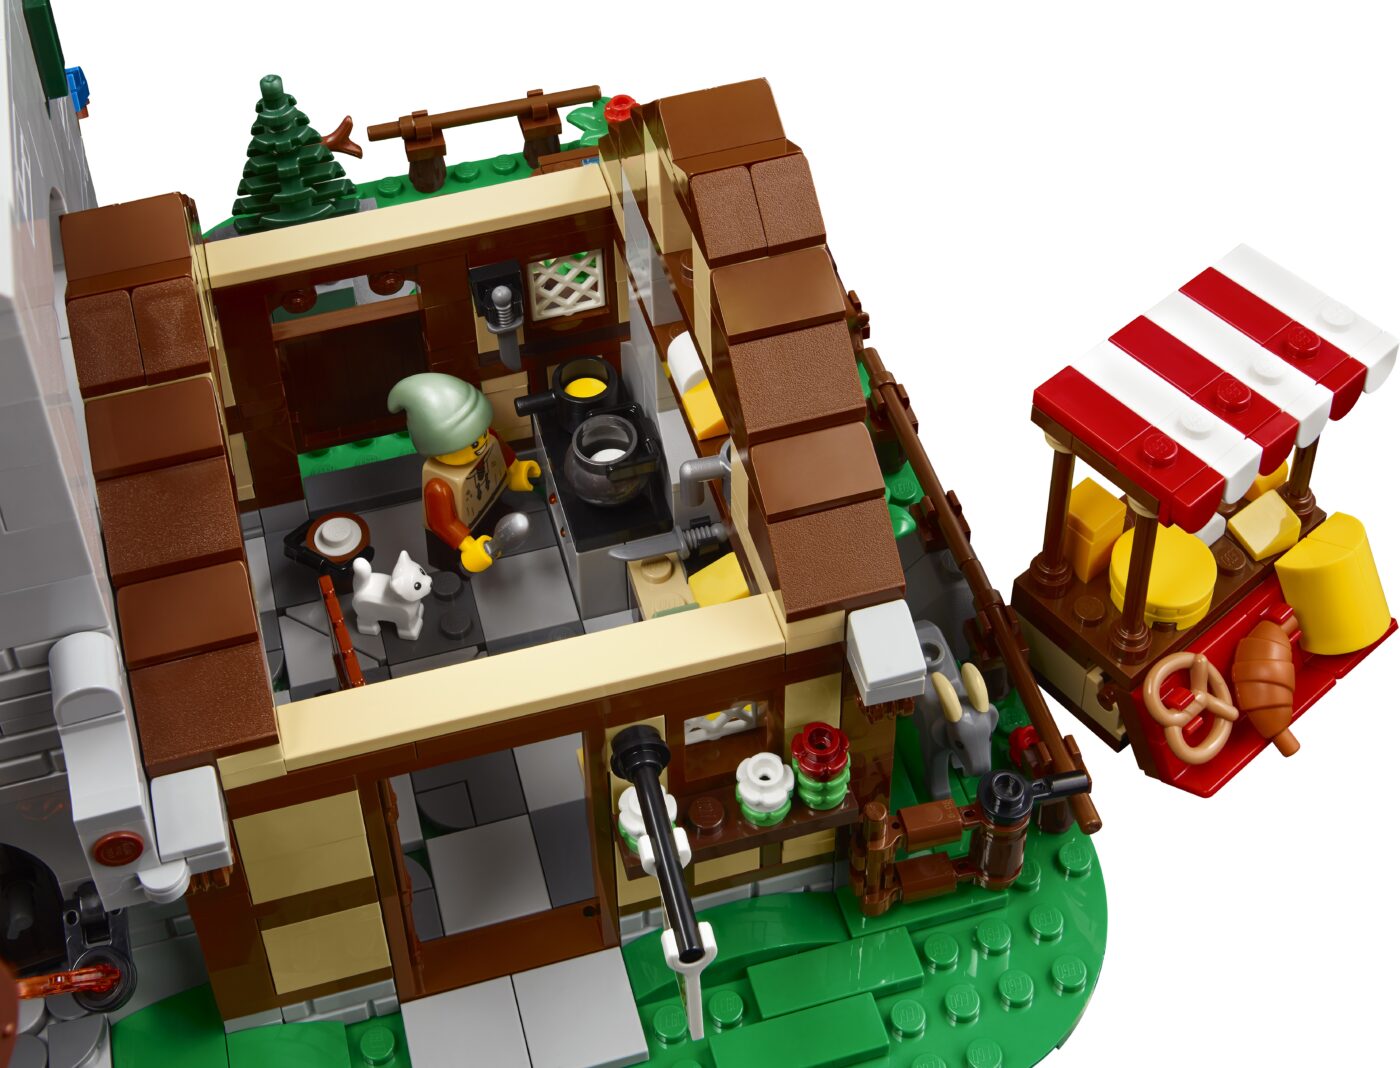 LEGO 10332 Medieval Town Square is a modern update to Medieval Market Village with a new grey LEGO goat!15